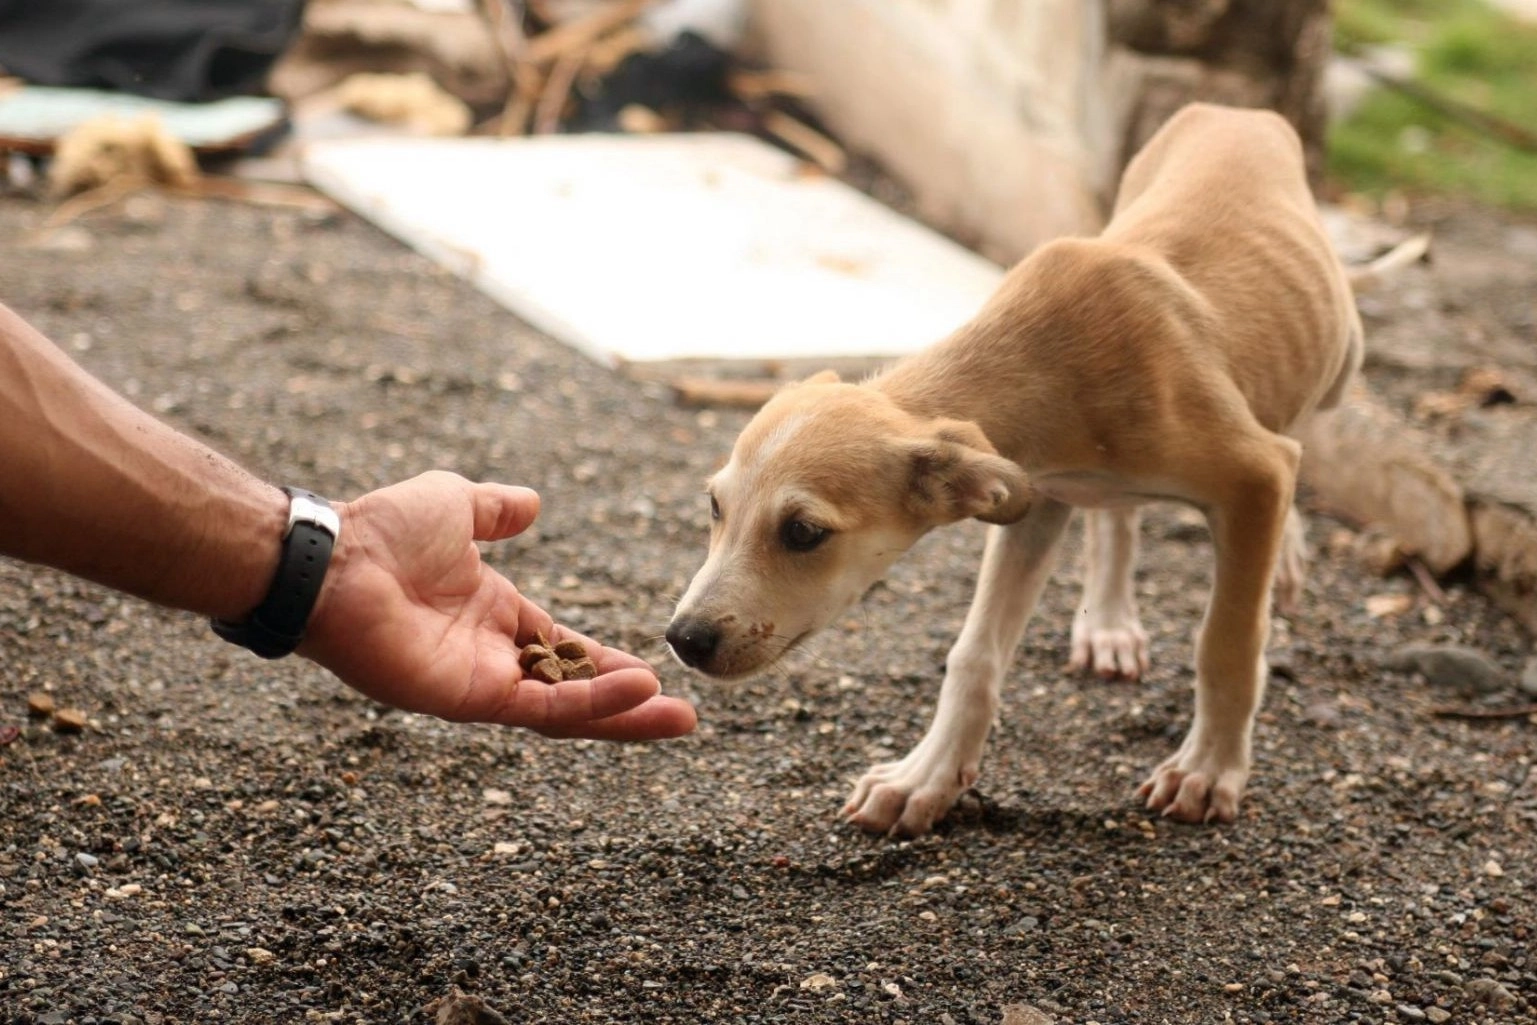 Protecting animals in disasters